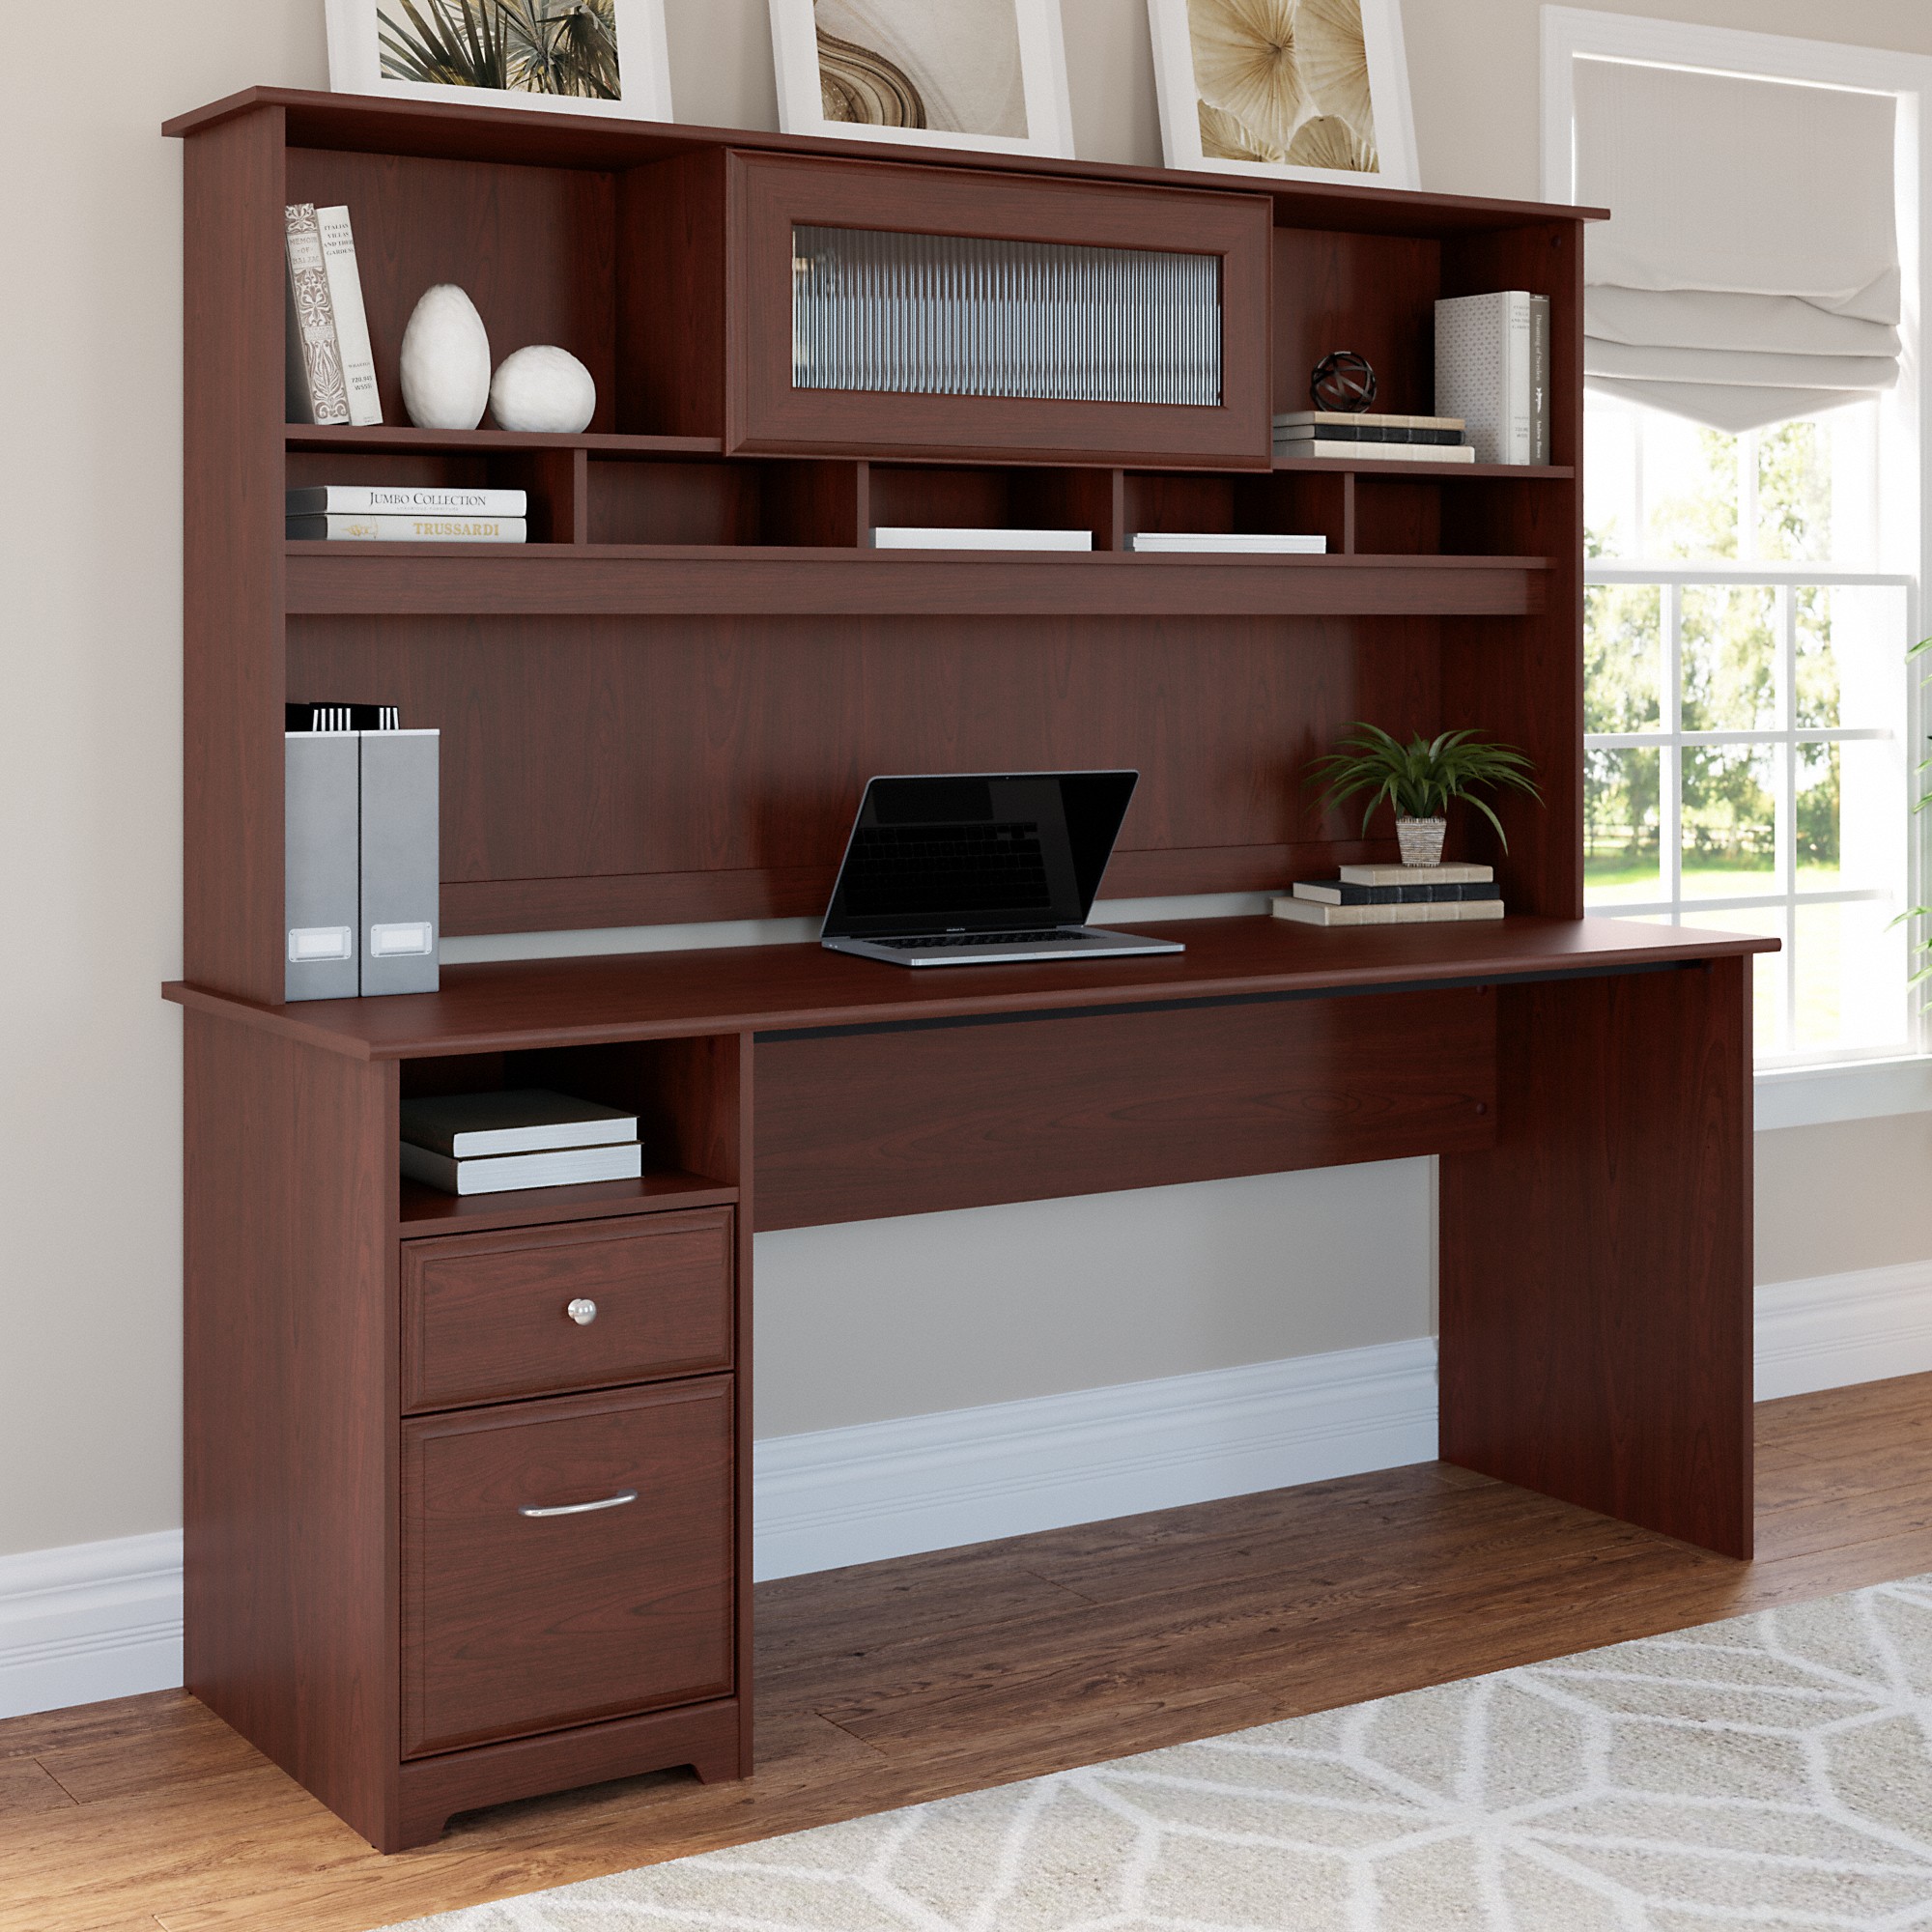 Cabot Modern 72W Hutch with Storage, Fits 72 W Desk (sold separately) in Harvest Cherry - image 3 of 8